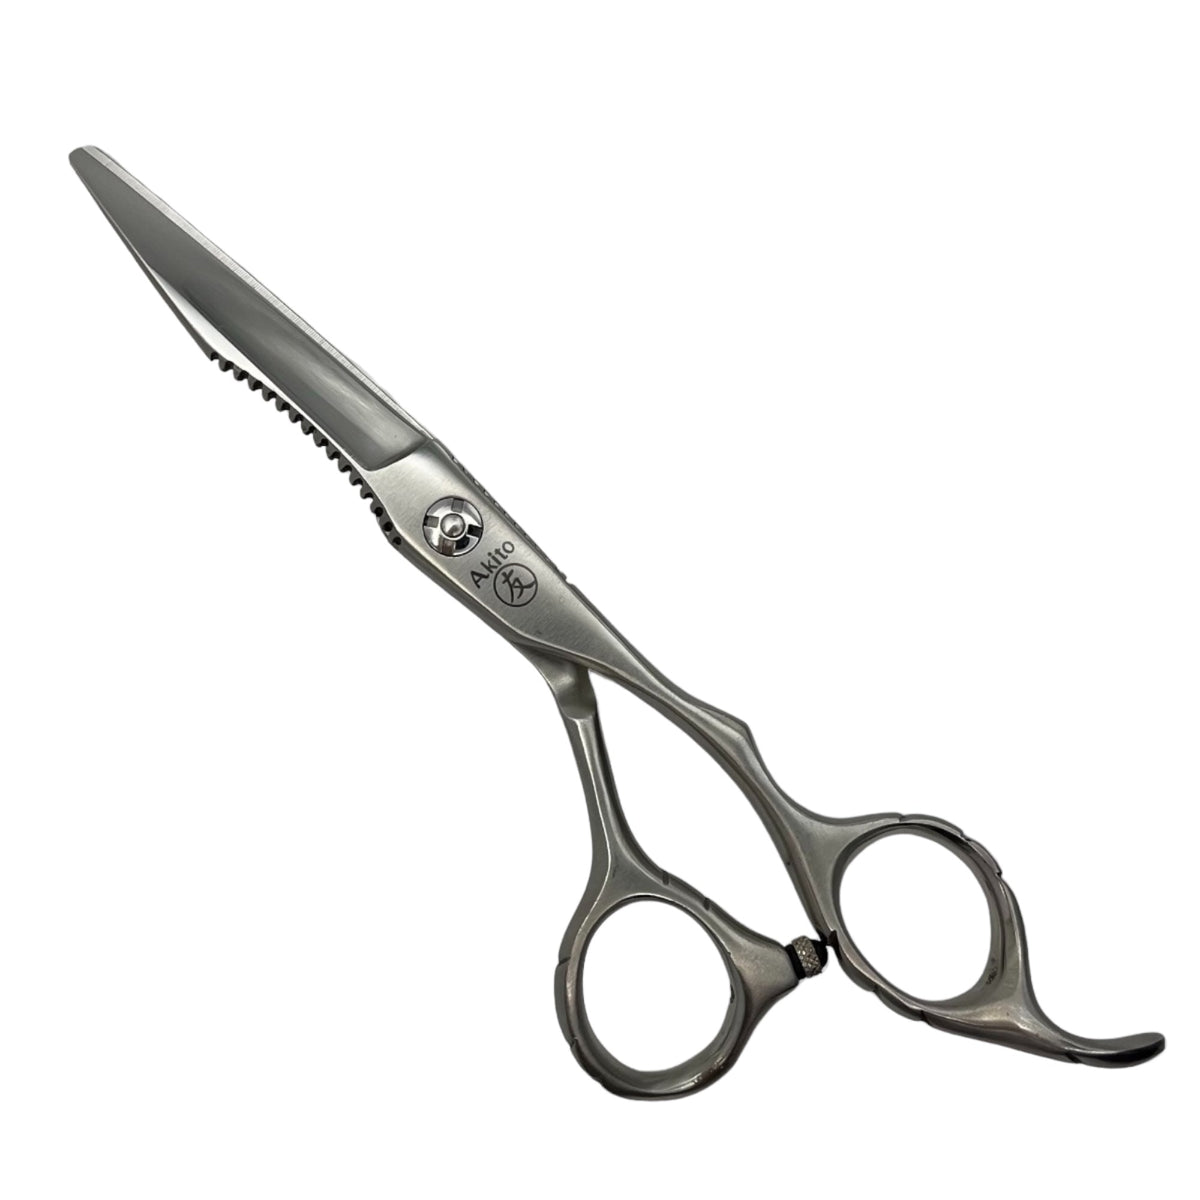 X-5 silver barber scissors on angle